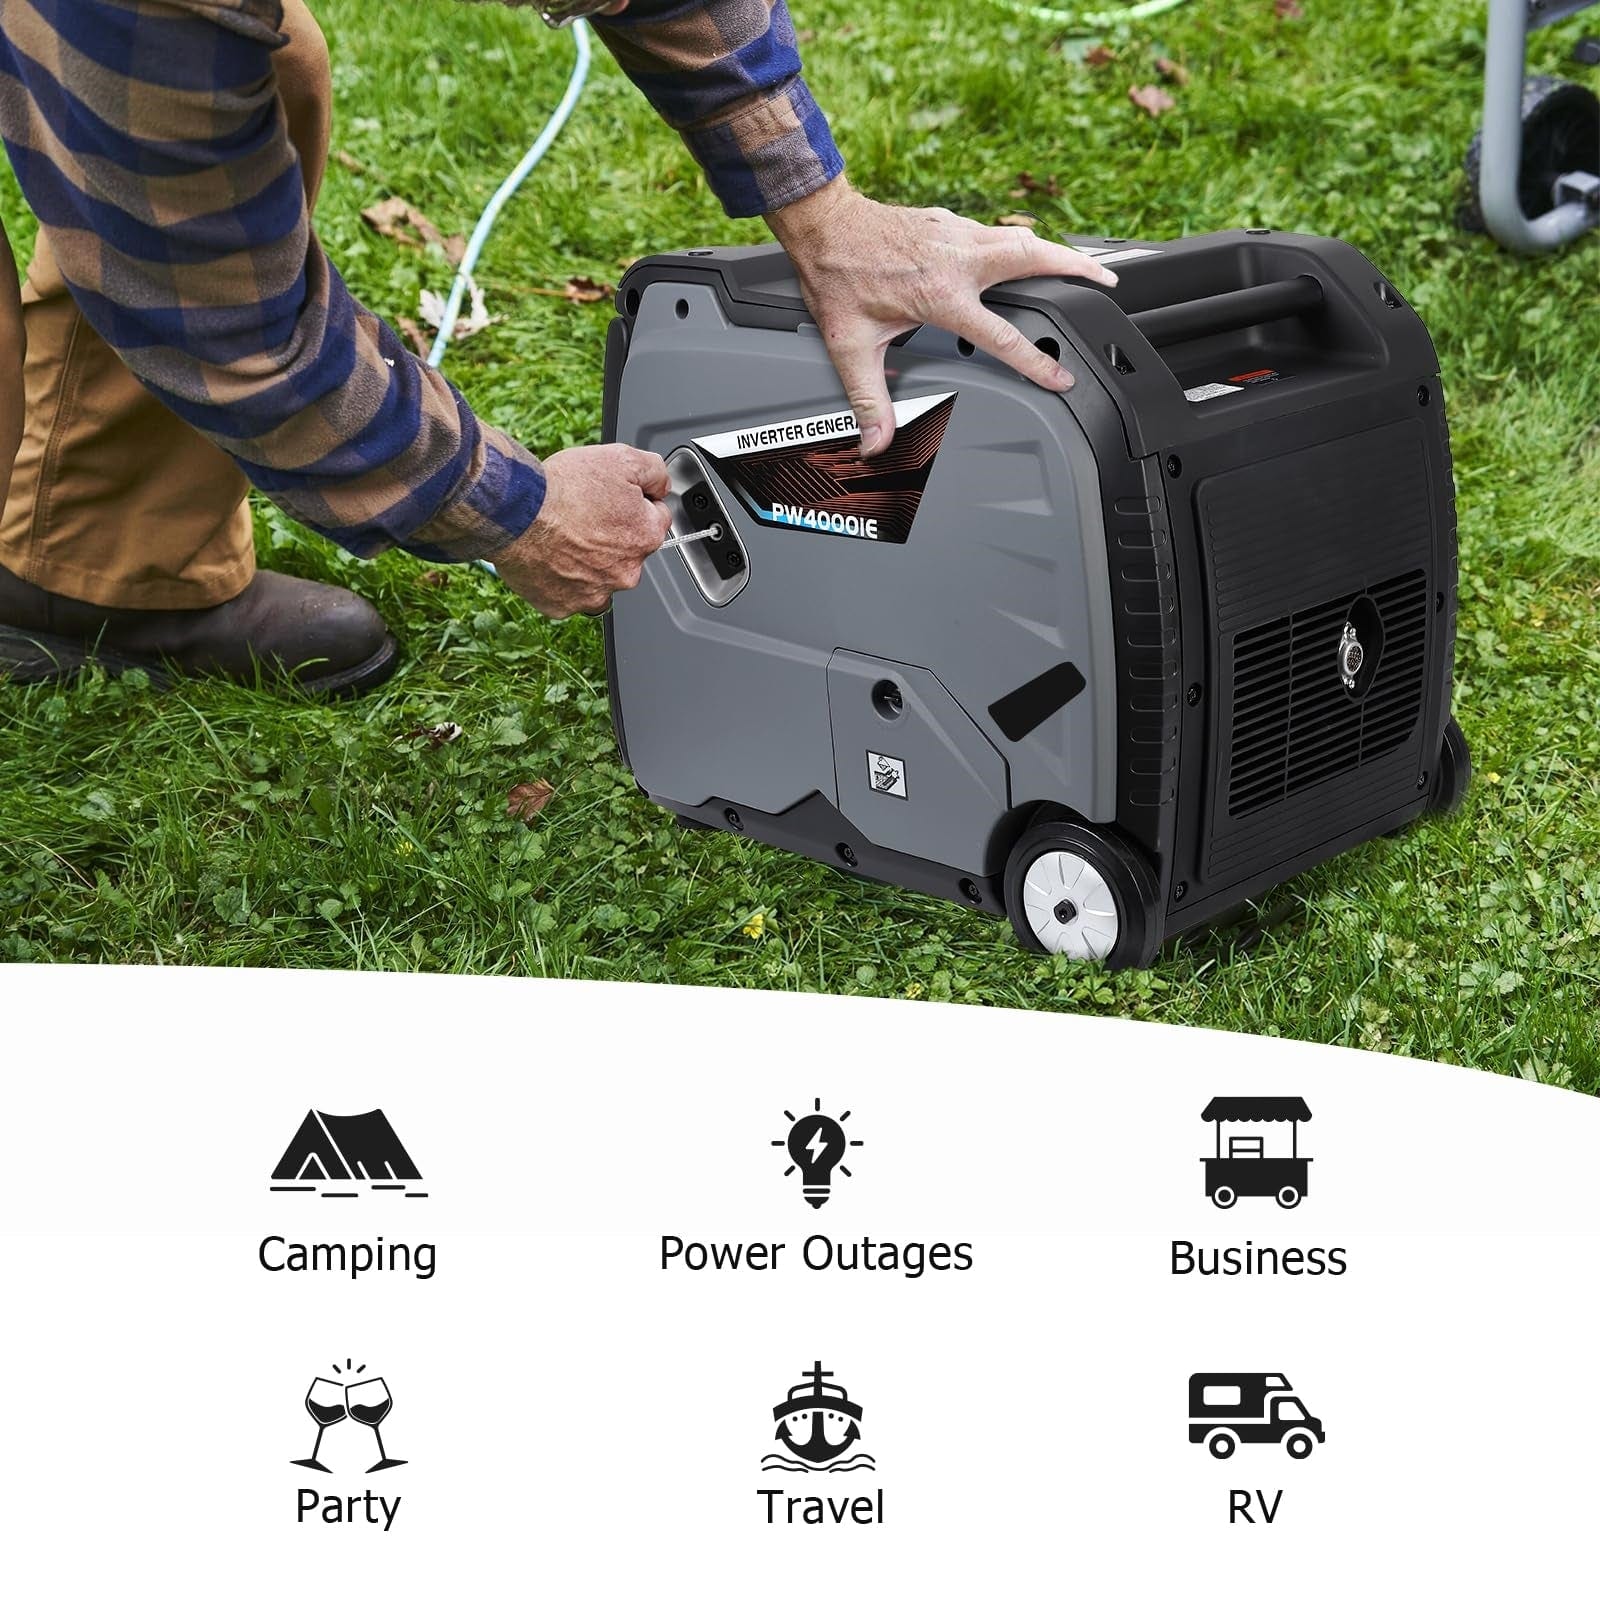 GARVEE 4000W Portable Inverter Generator Ultra Quiet Gas Engine with CO-Monitoring